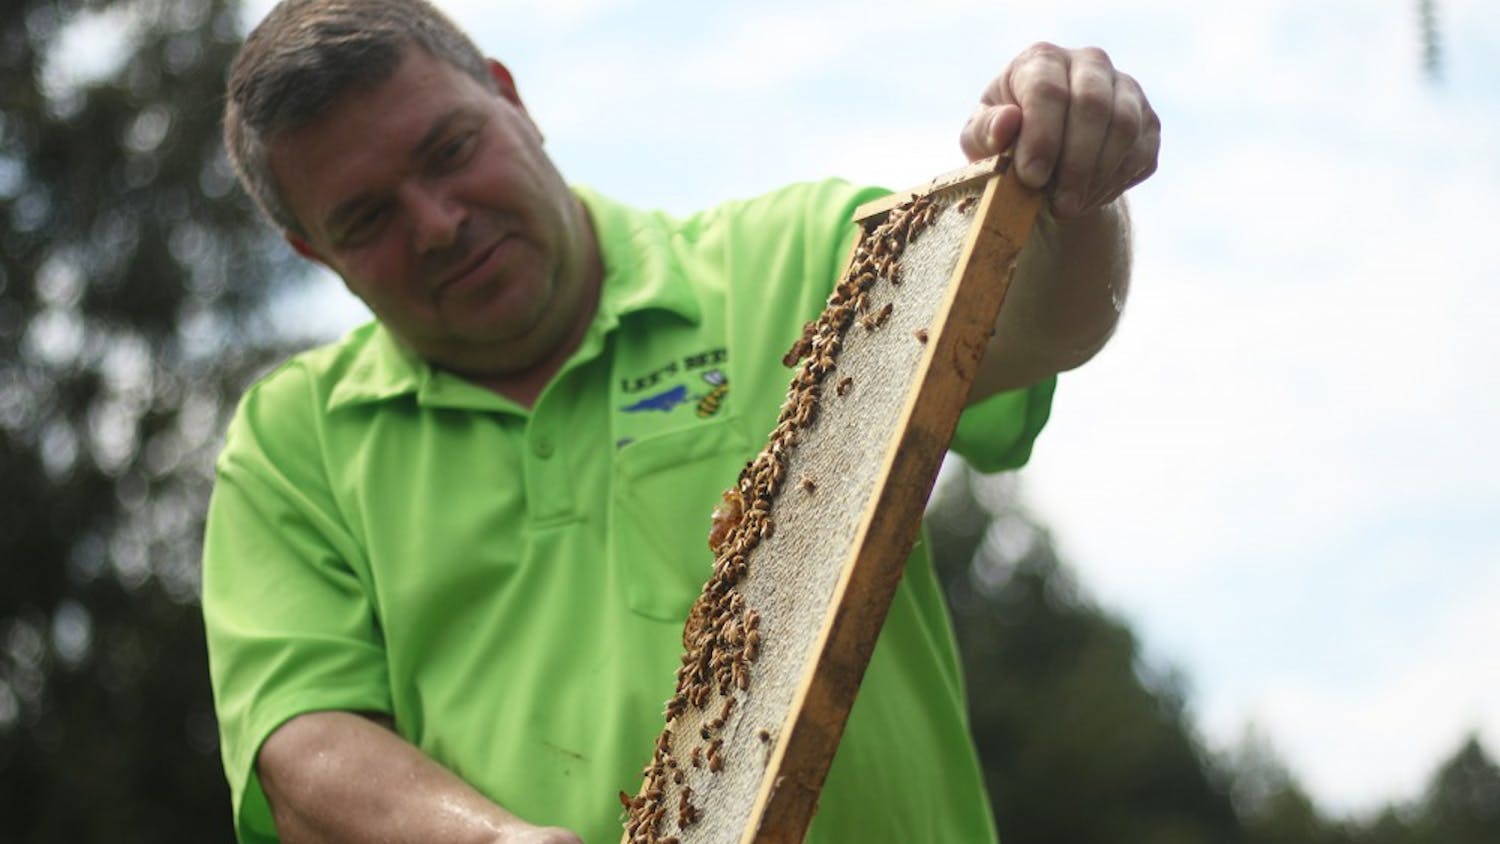 Jeff Lee, owner and beekeeper of Lee's Bees, removes a tray of bees from their hive. 